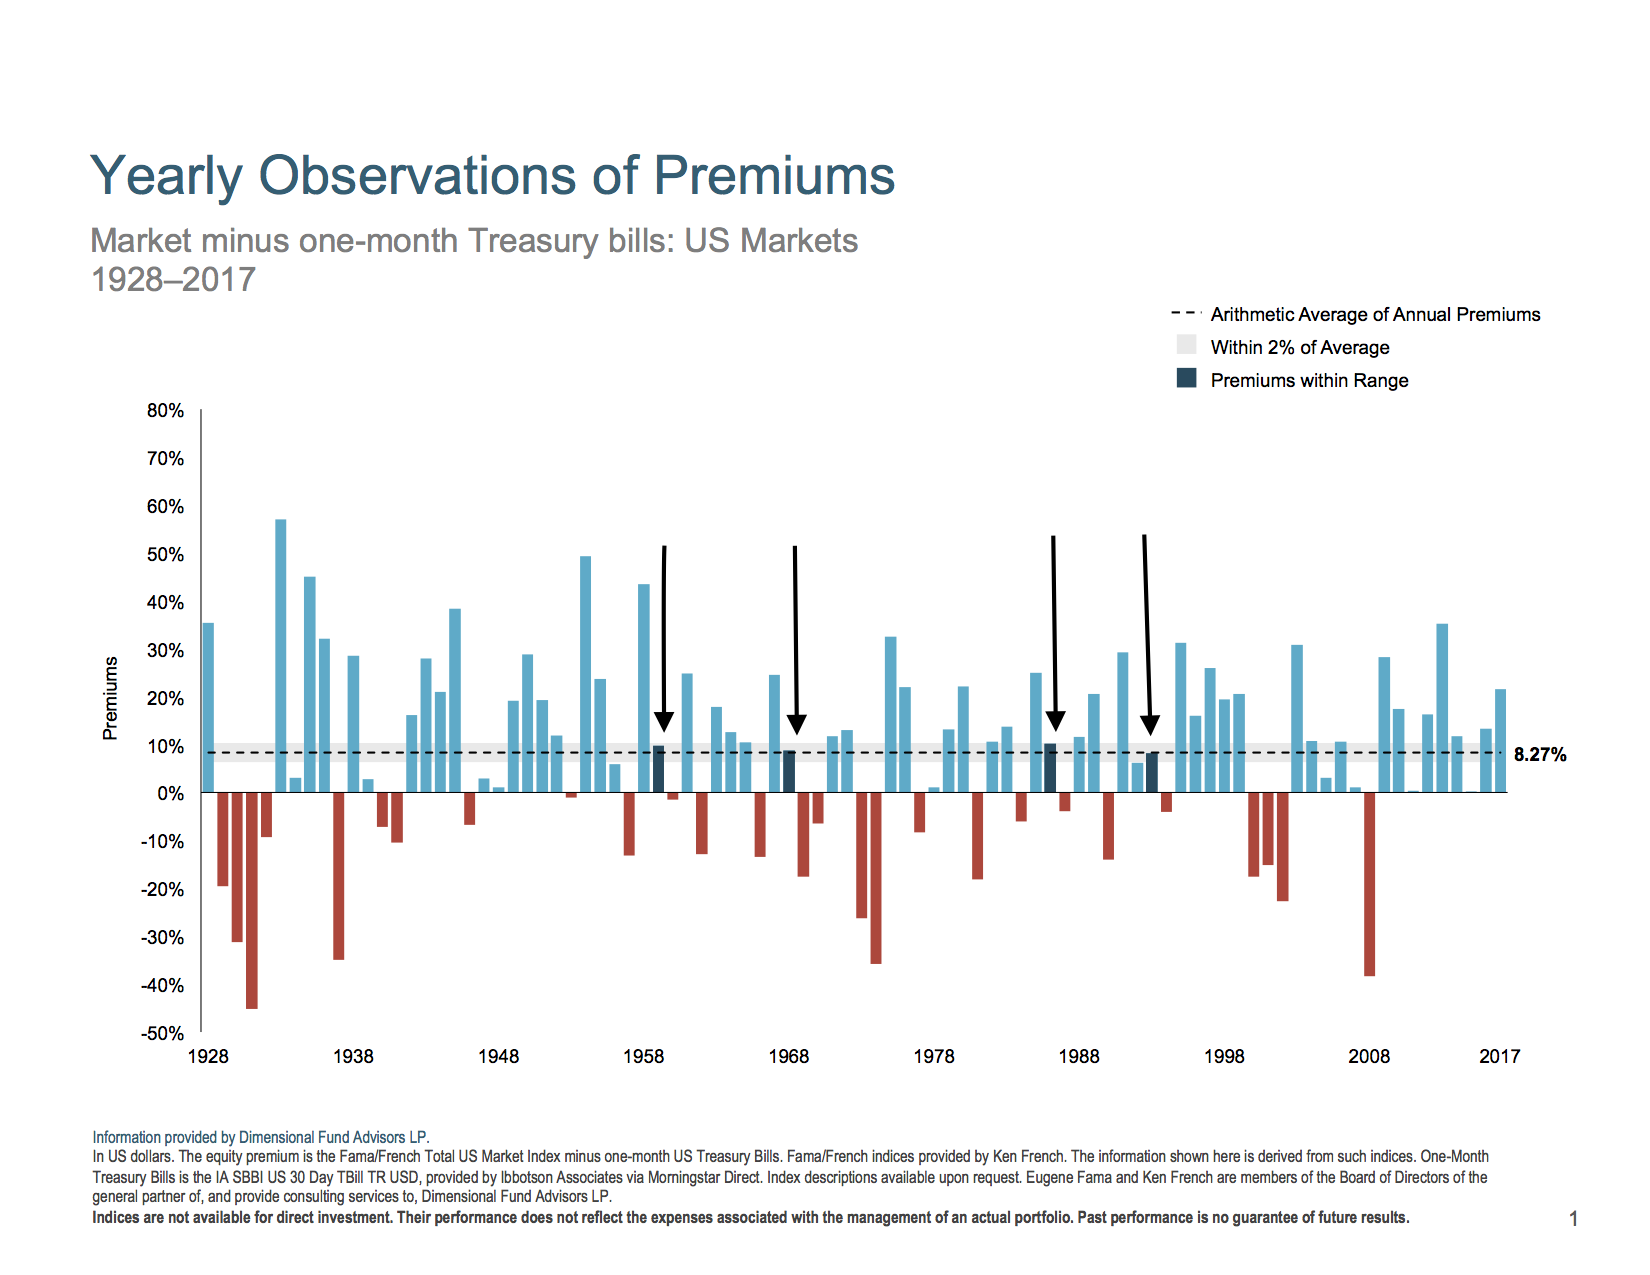 Yearly observation of premiums.  US stock market minus one-month treasury bills.  1928 to 2017.